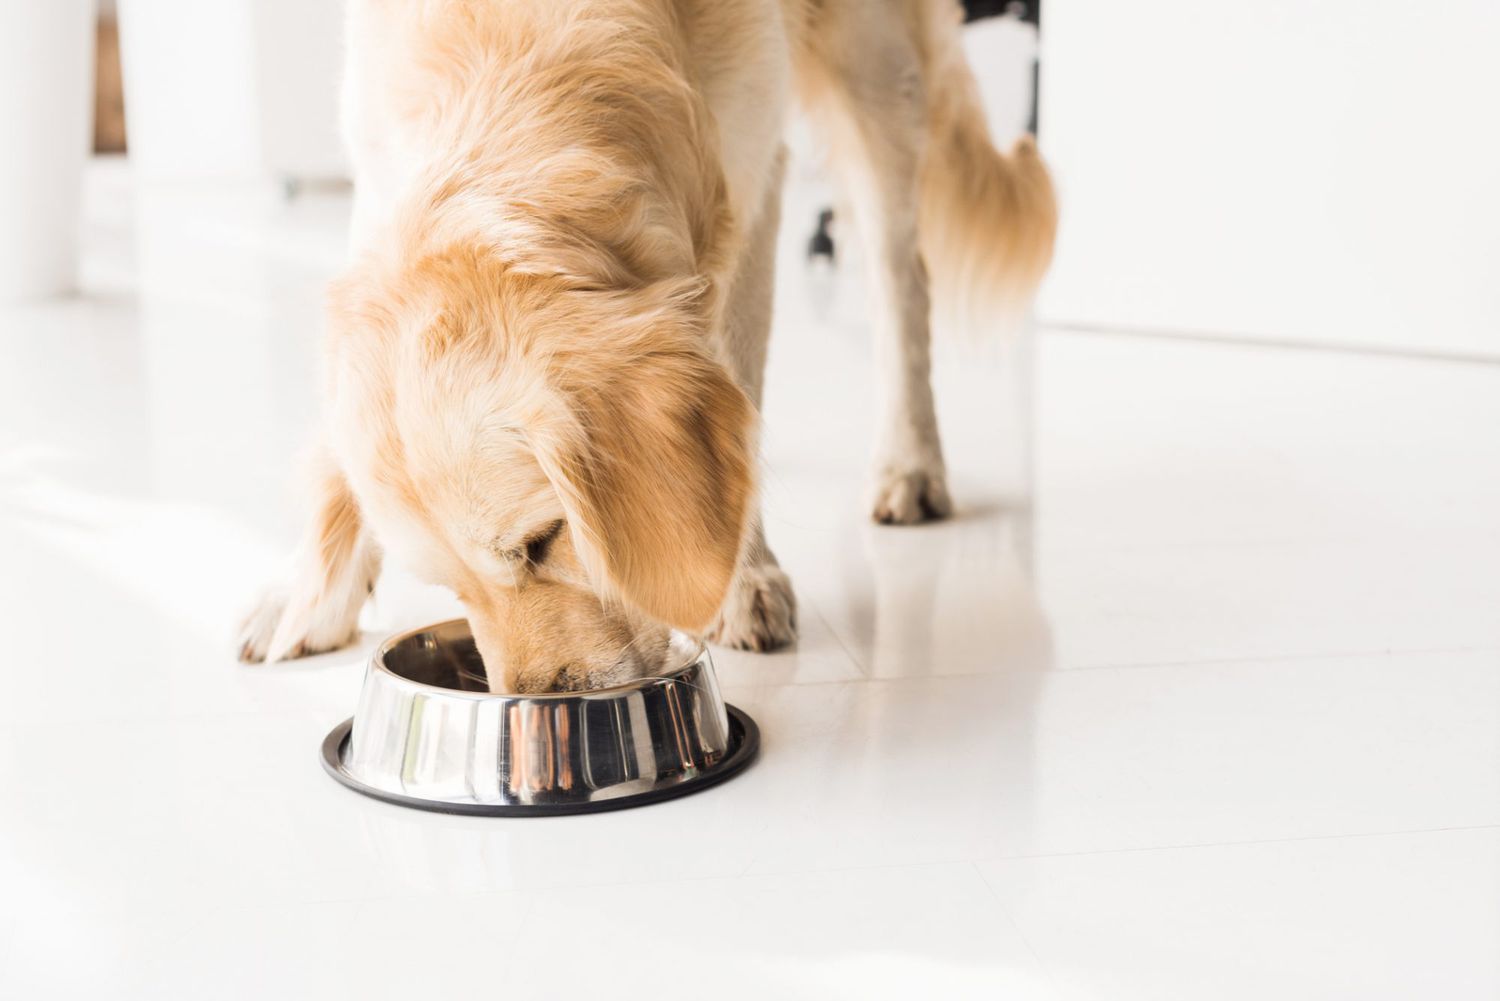 Know The Different Aspects of the Heavy Dog Bowl